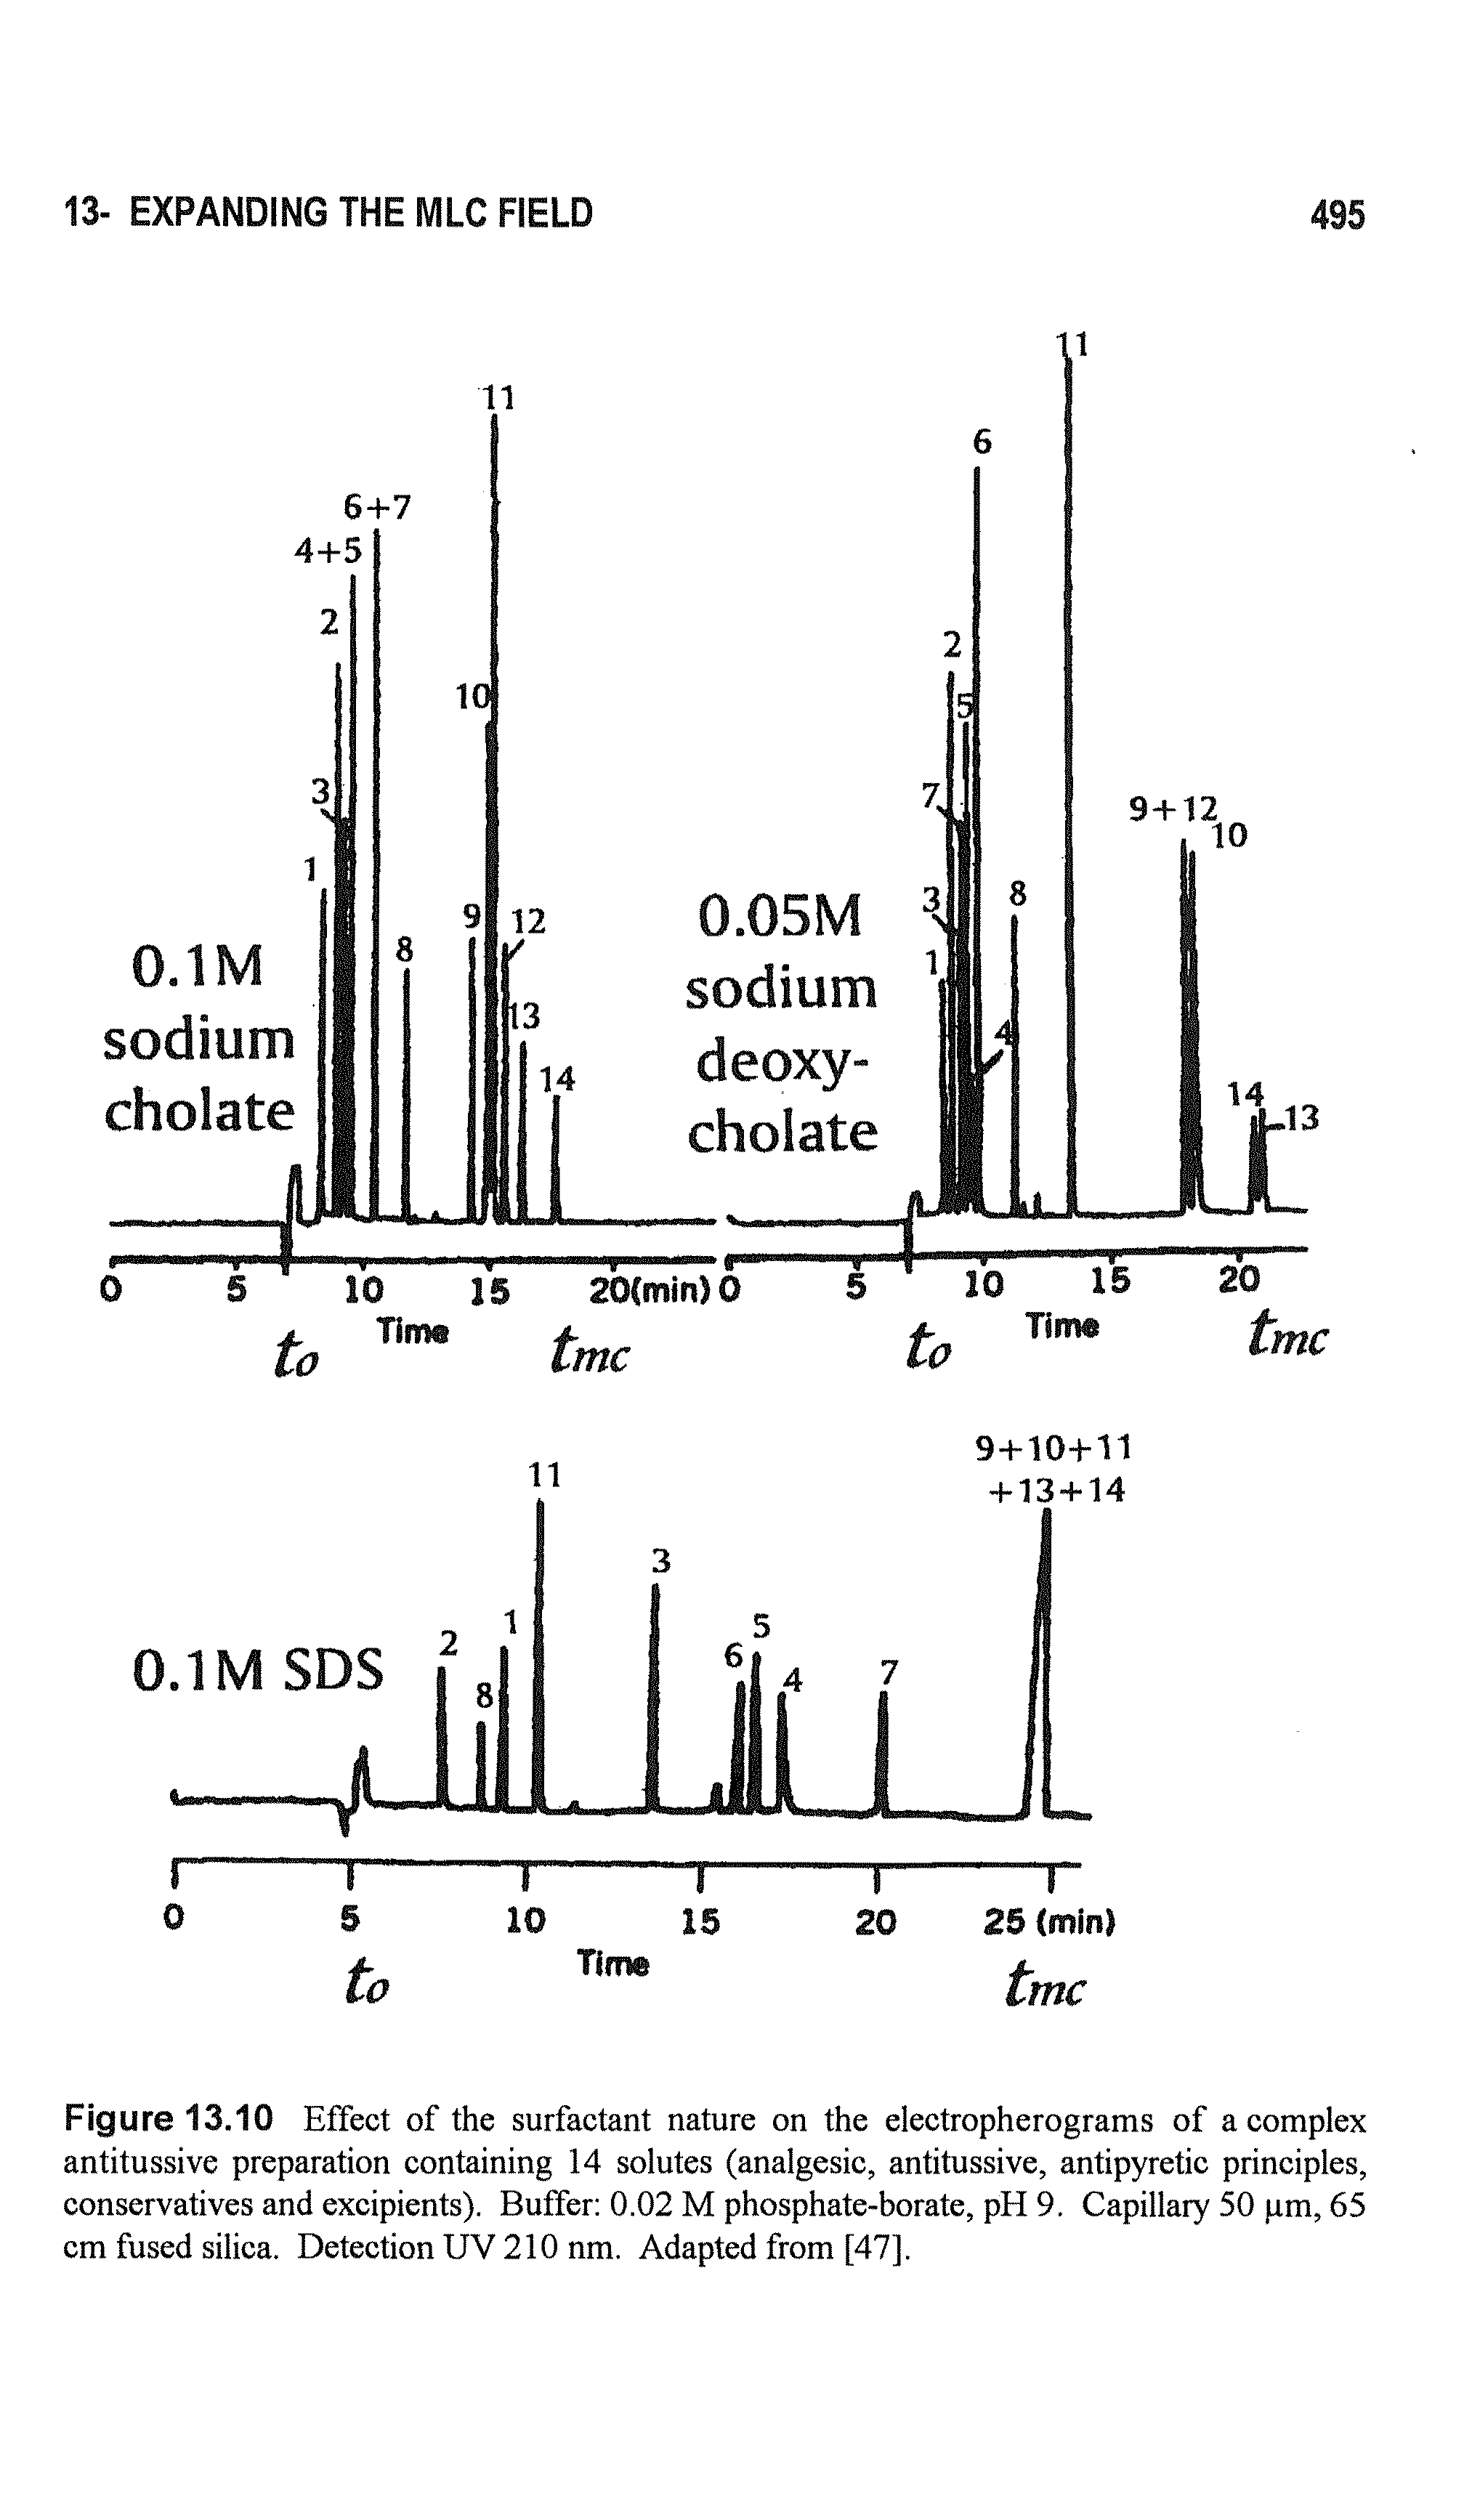 Figure 13.10 Effect of the surfactant nature on the electropherograms of a complex antitussive preparation containing 14 solutes (analgesic, antitussive, antipyretic principles, conservatives and excipients). Buffer 0.02 M phosphate-borate, pH 9. Capillary 50 pm, 65 cm fused silica. Detection UV 210 nm. Adapted from [47].